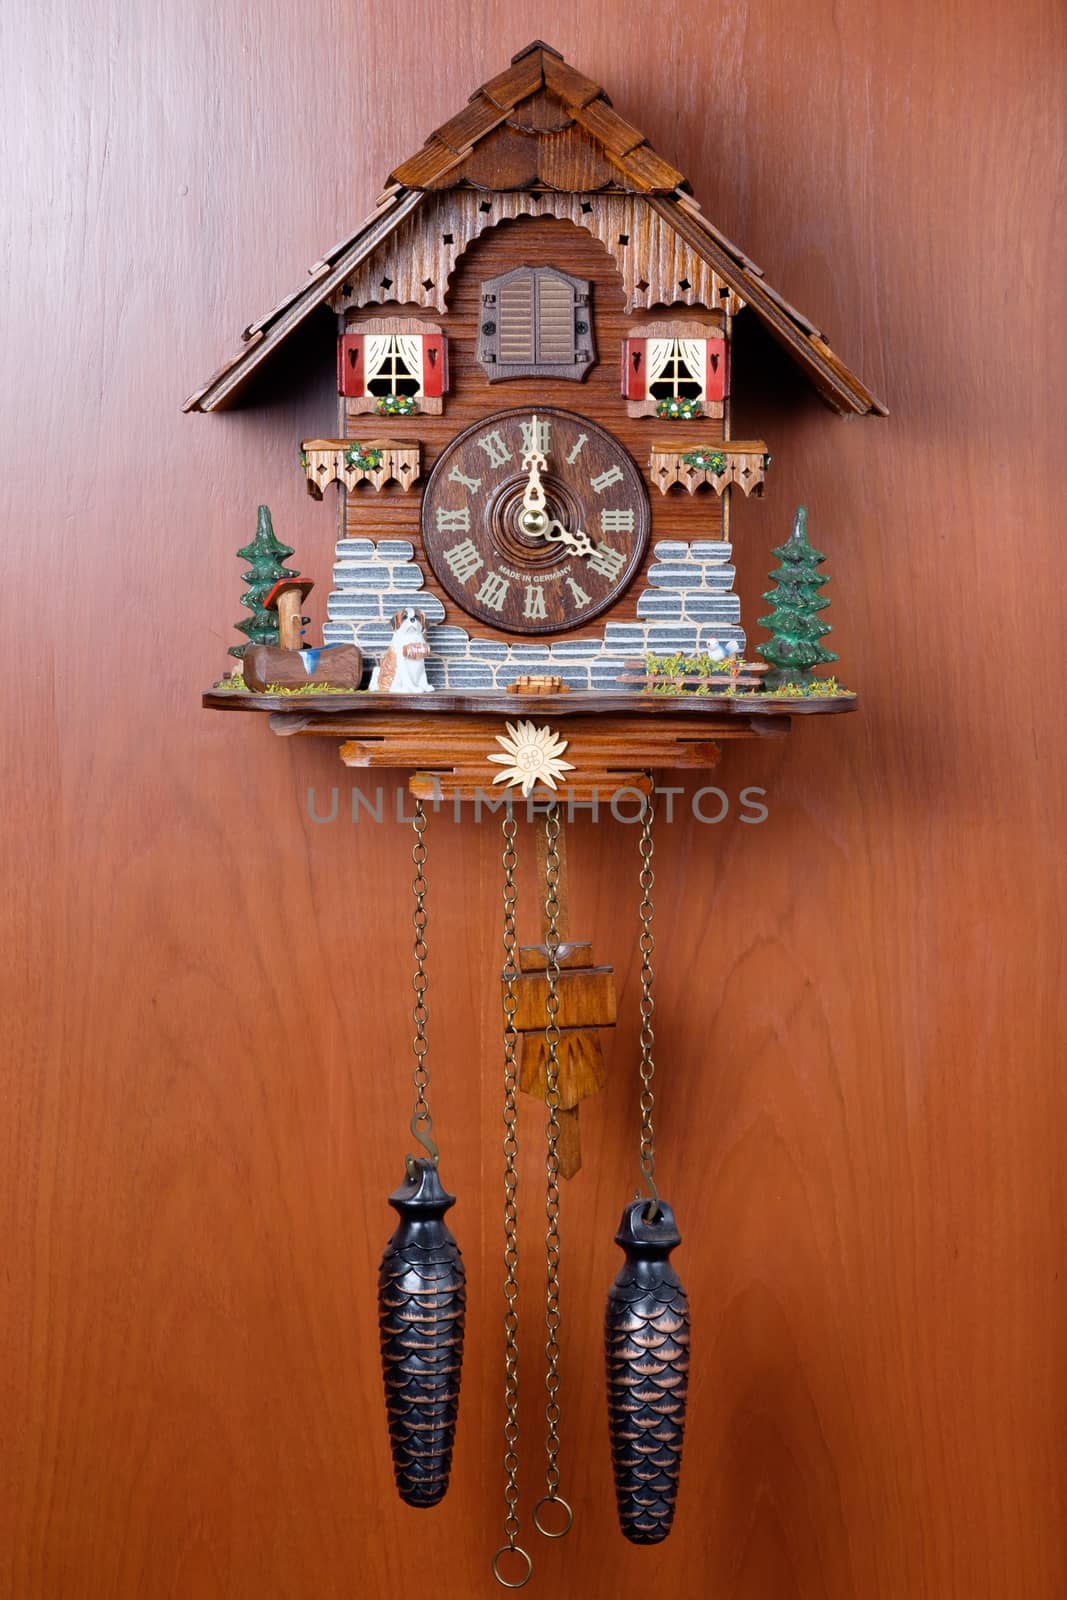 Cuckoo clock with birdie out of house made by crafted wooden